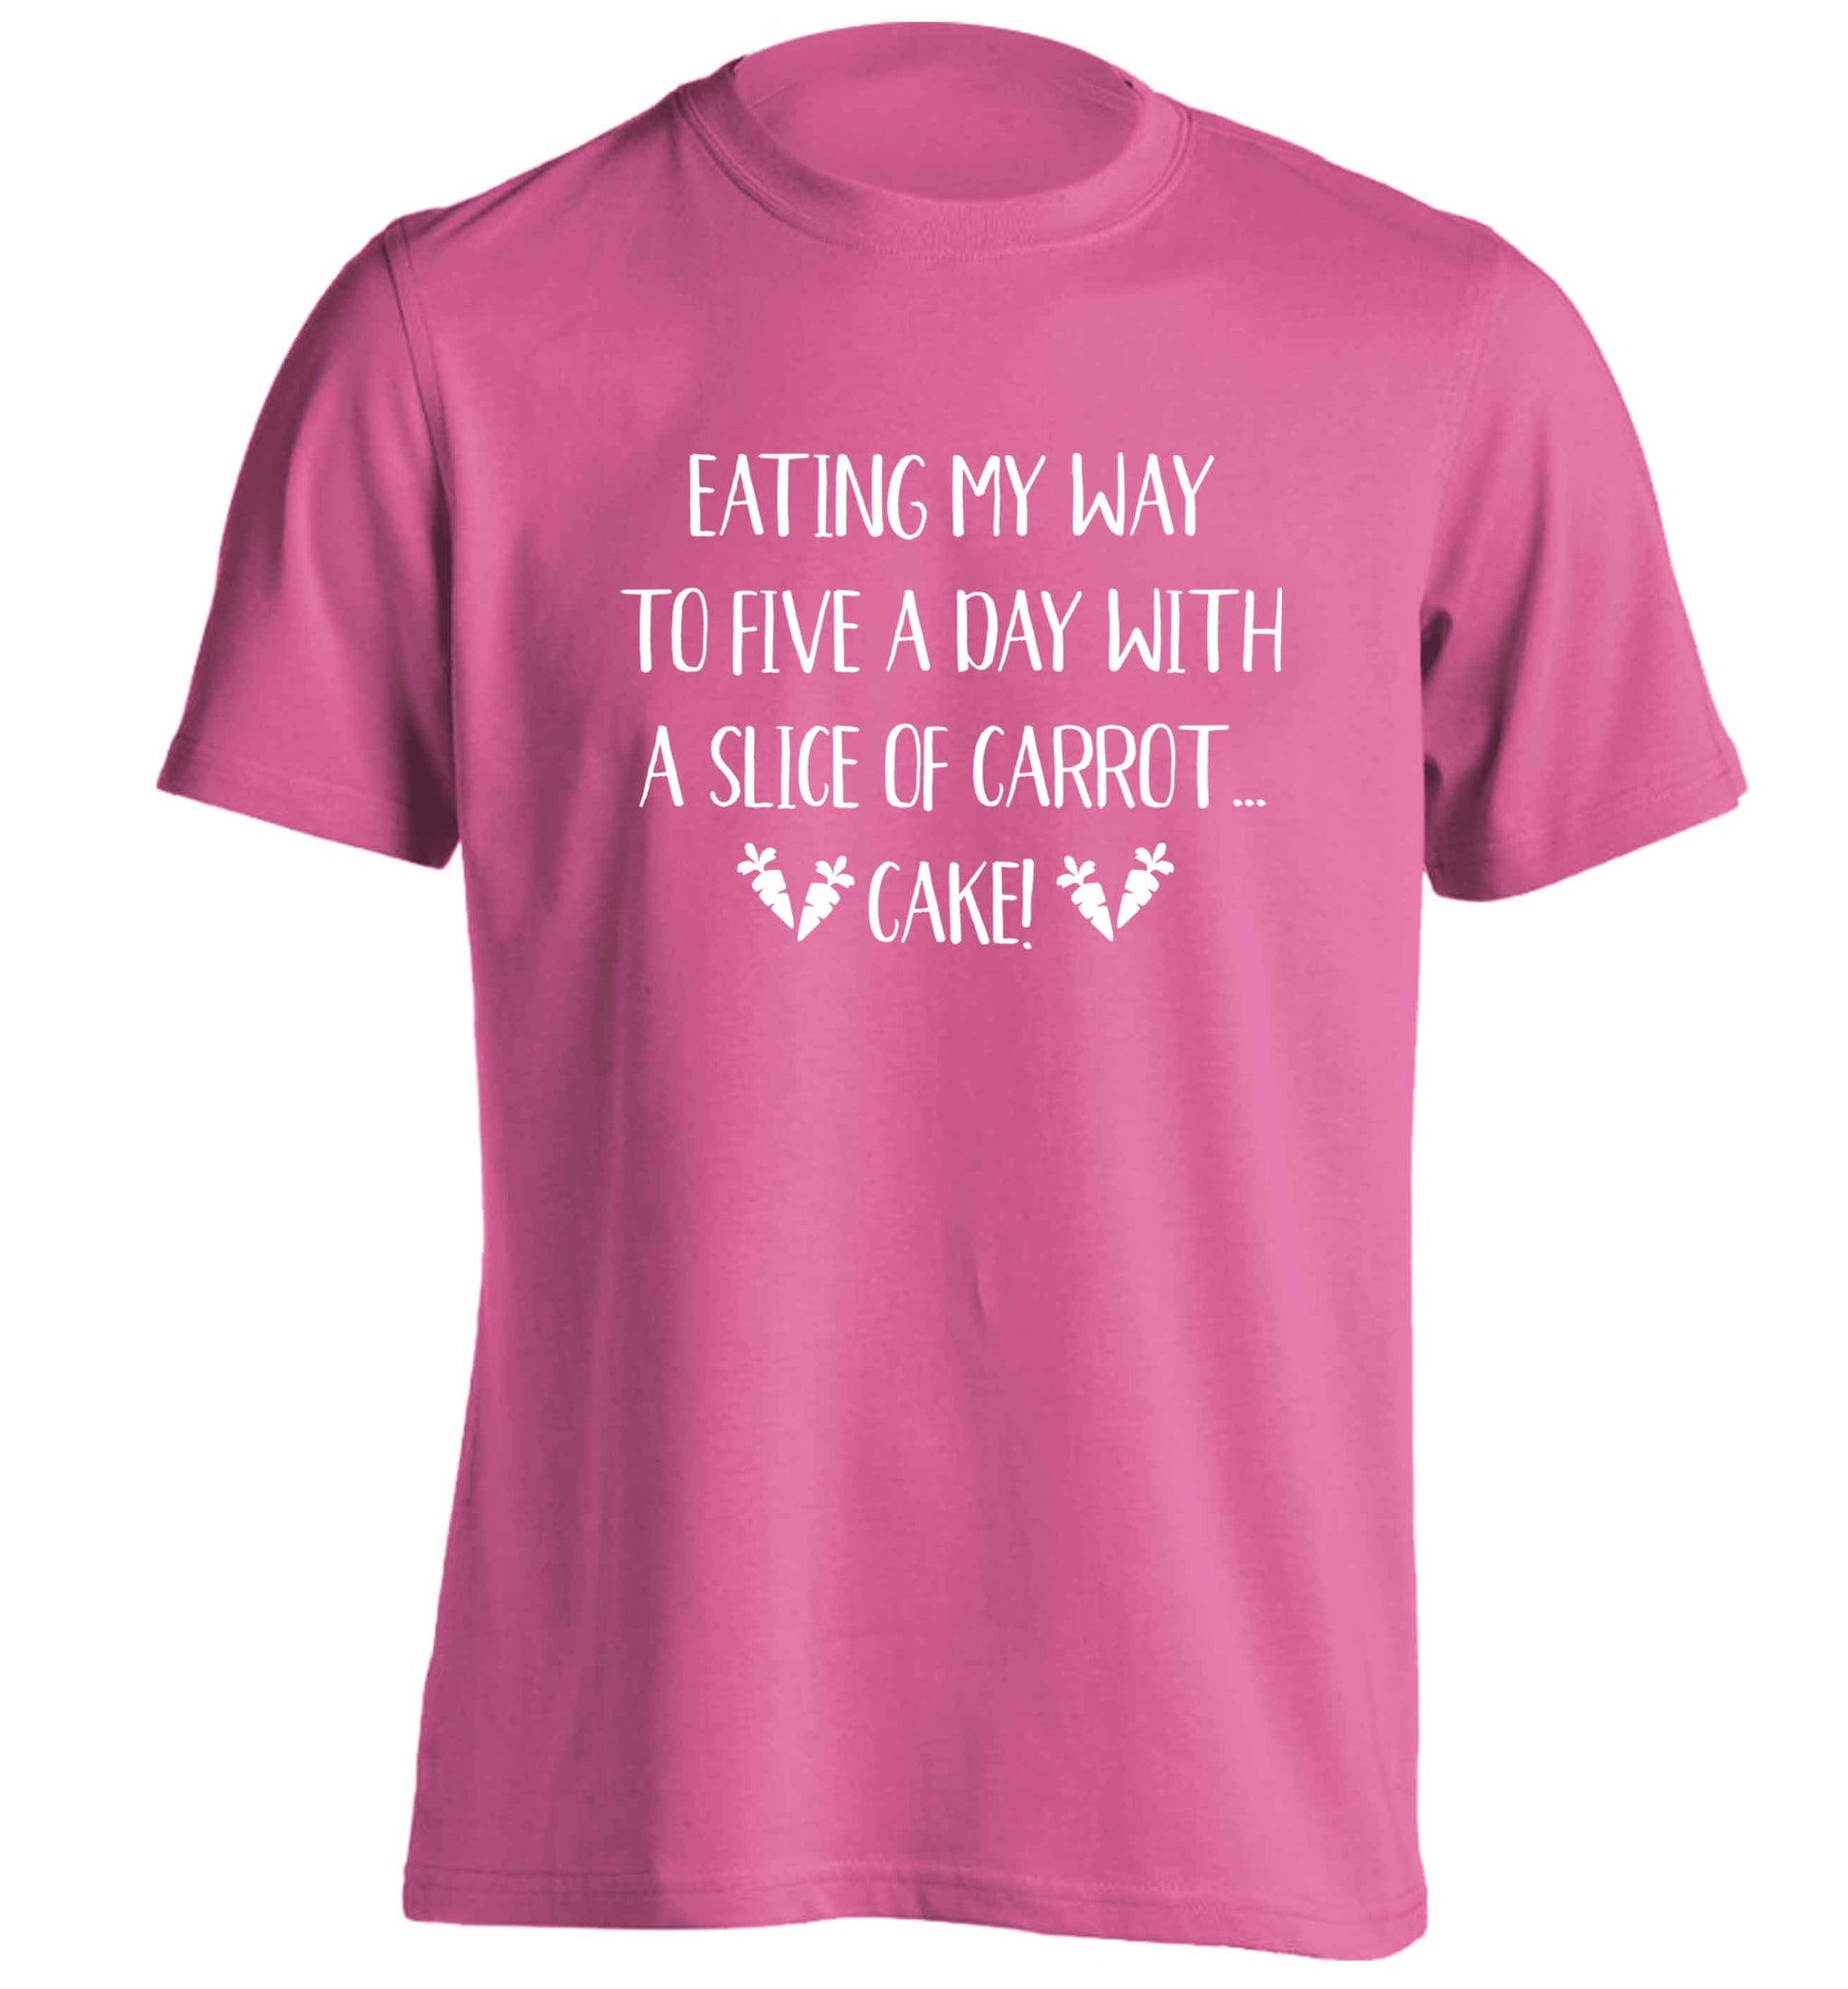 Eating my way to five a day with a slice of carrot cake day adults unisex pink Tshirt 2XL